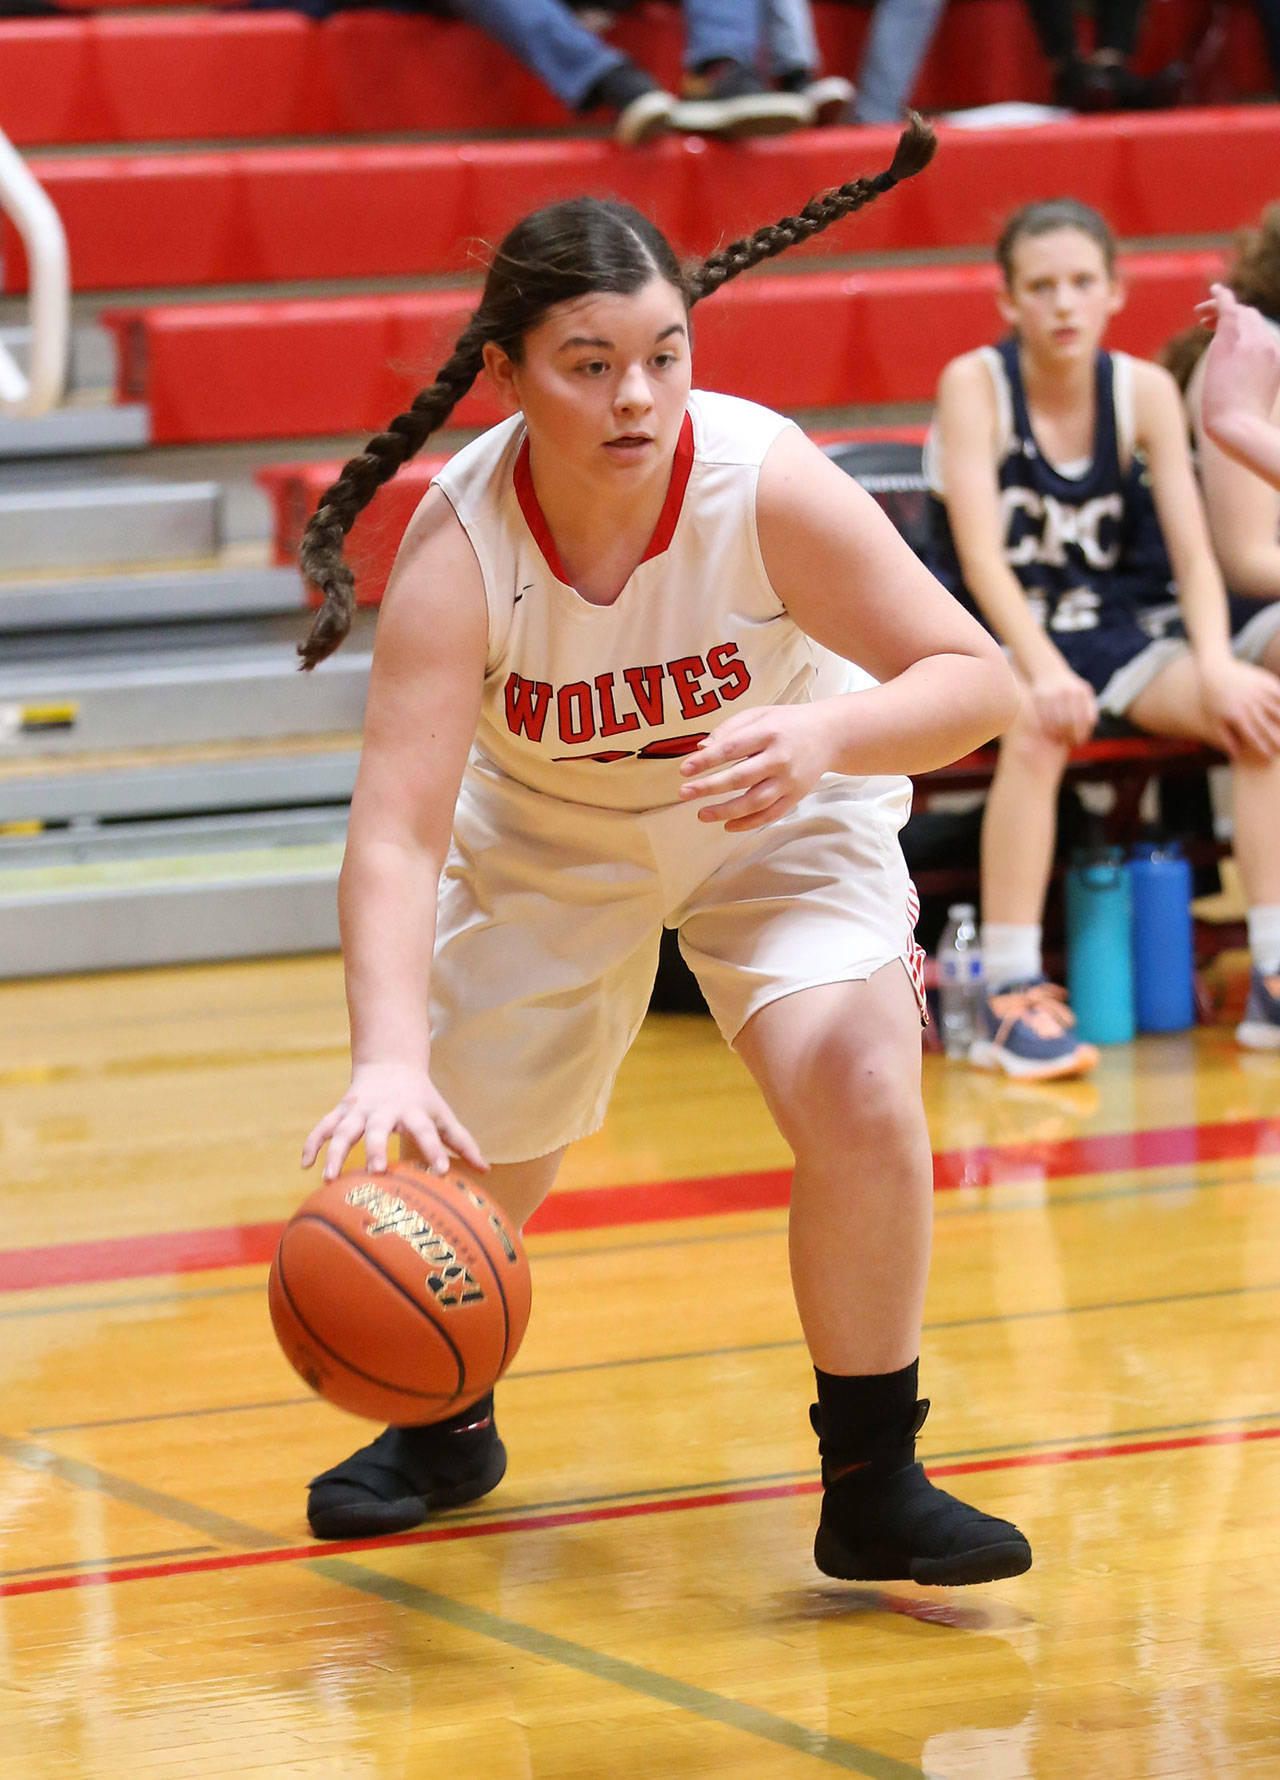 Mollie Bailey looks to attack for the Wolves. (Photo by John Fisken)